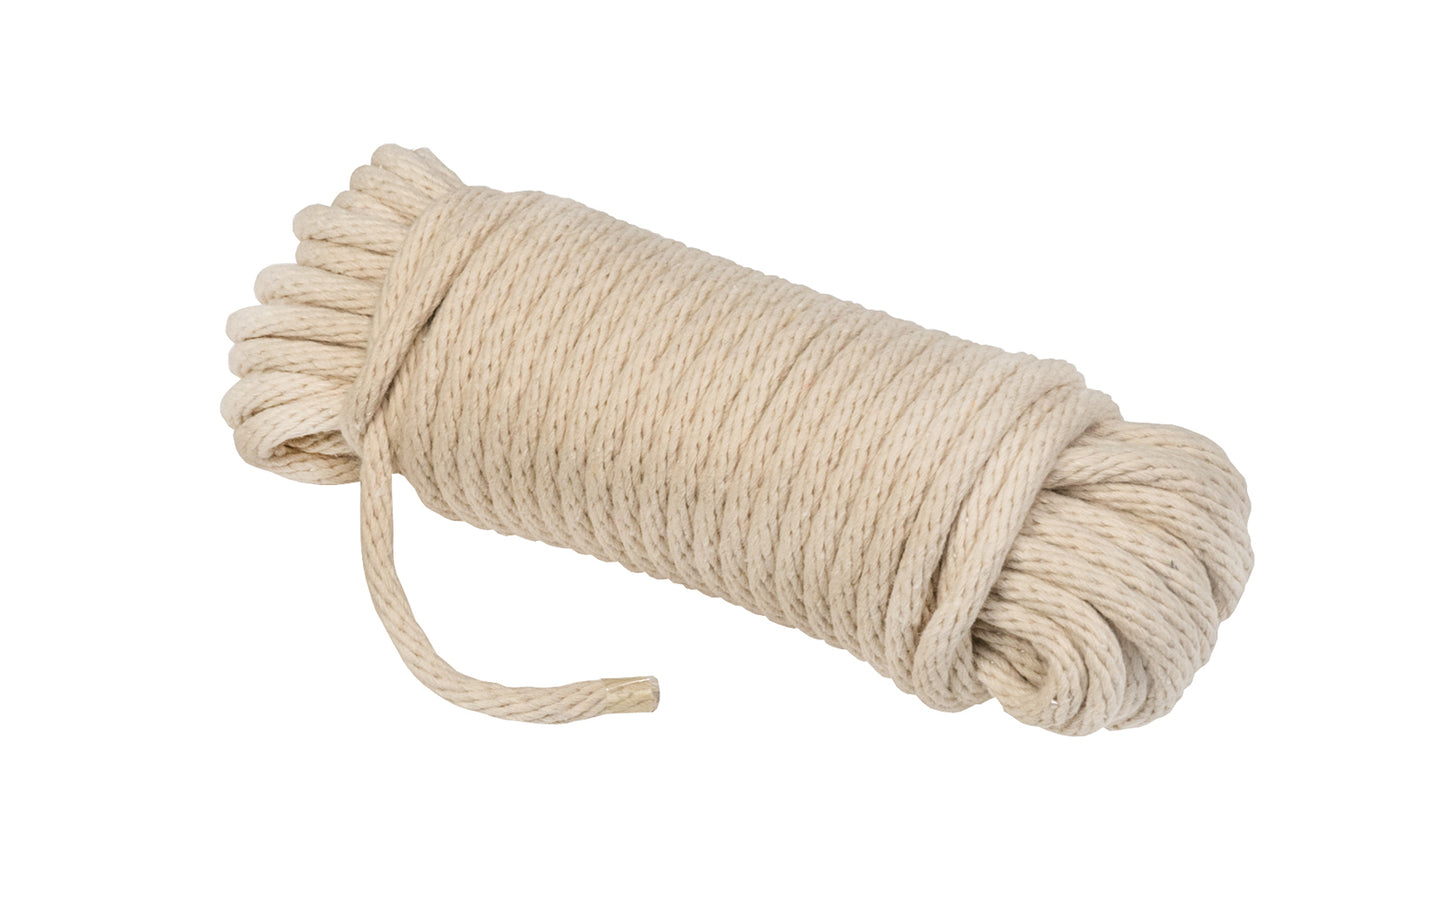 Natural Cotton Braided Sash Cord ~ #7 Size - 7/32" x 50'. Maximum wear & high breaking strength (26 lb. working load limit). Solid braided cotton sash cord for sash windows #7 size cord ~ Natural cotton fiber ~ Low stretch ~ 7/32" thick diameter x 50' long. Great for other purposes around the shop.